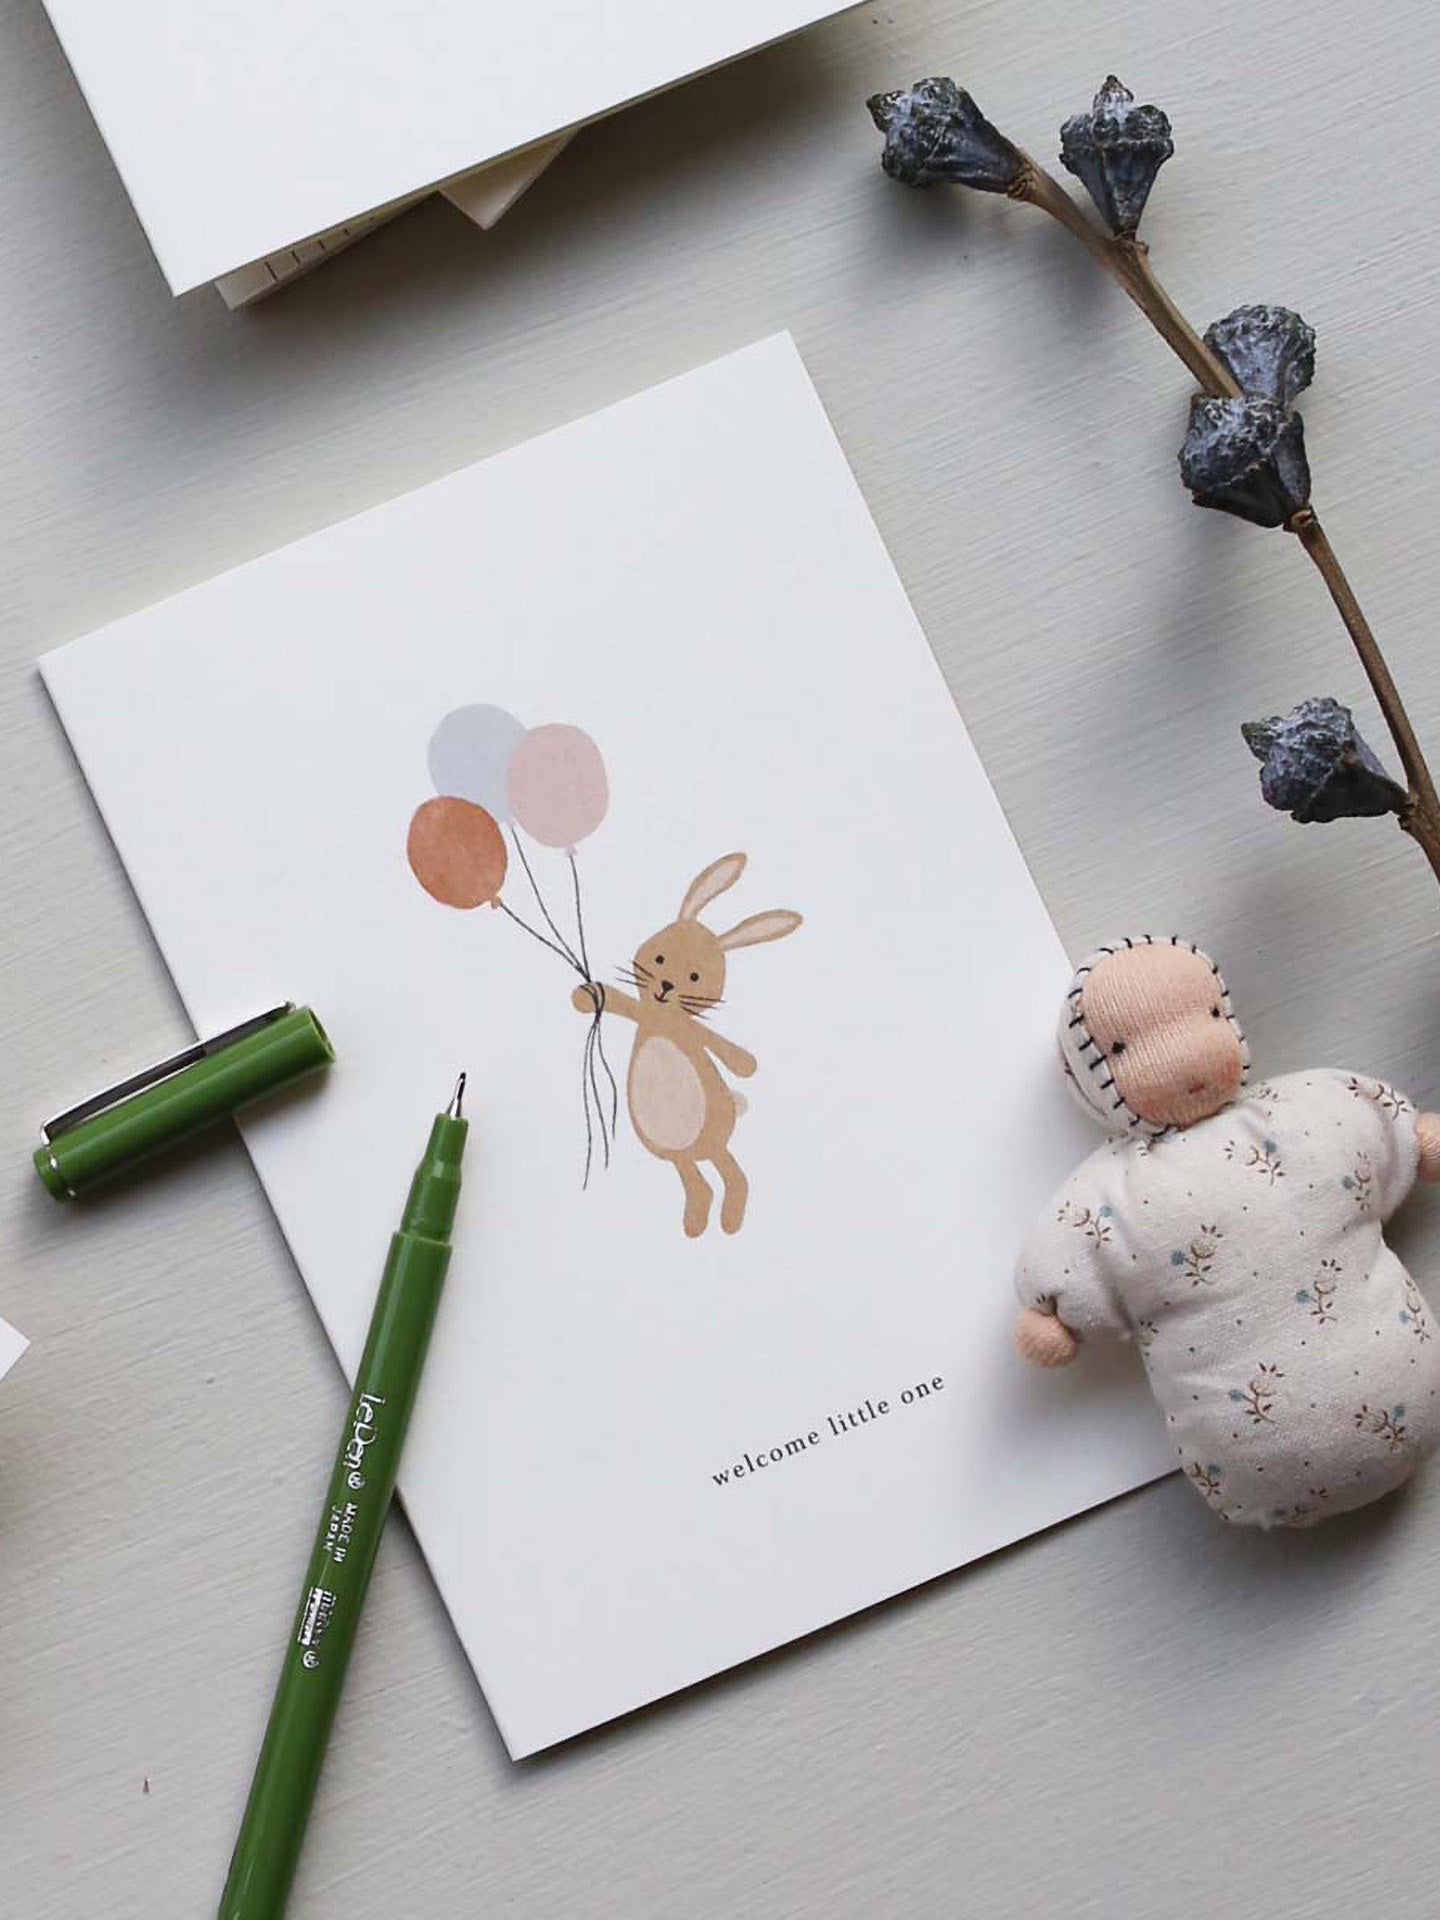 Bunny (welcome little one) new baby card